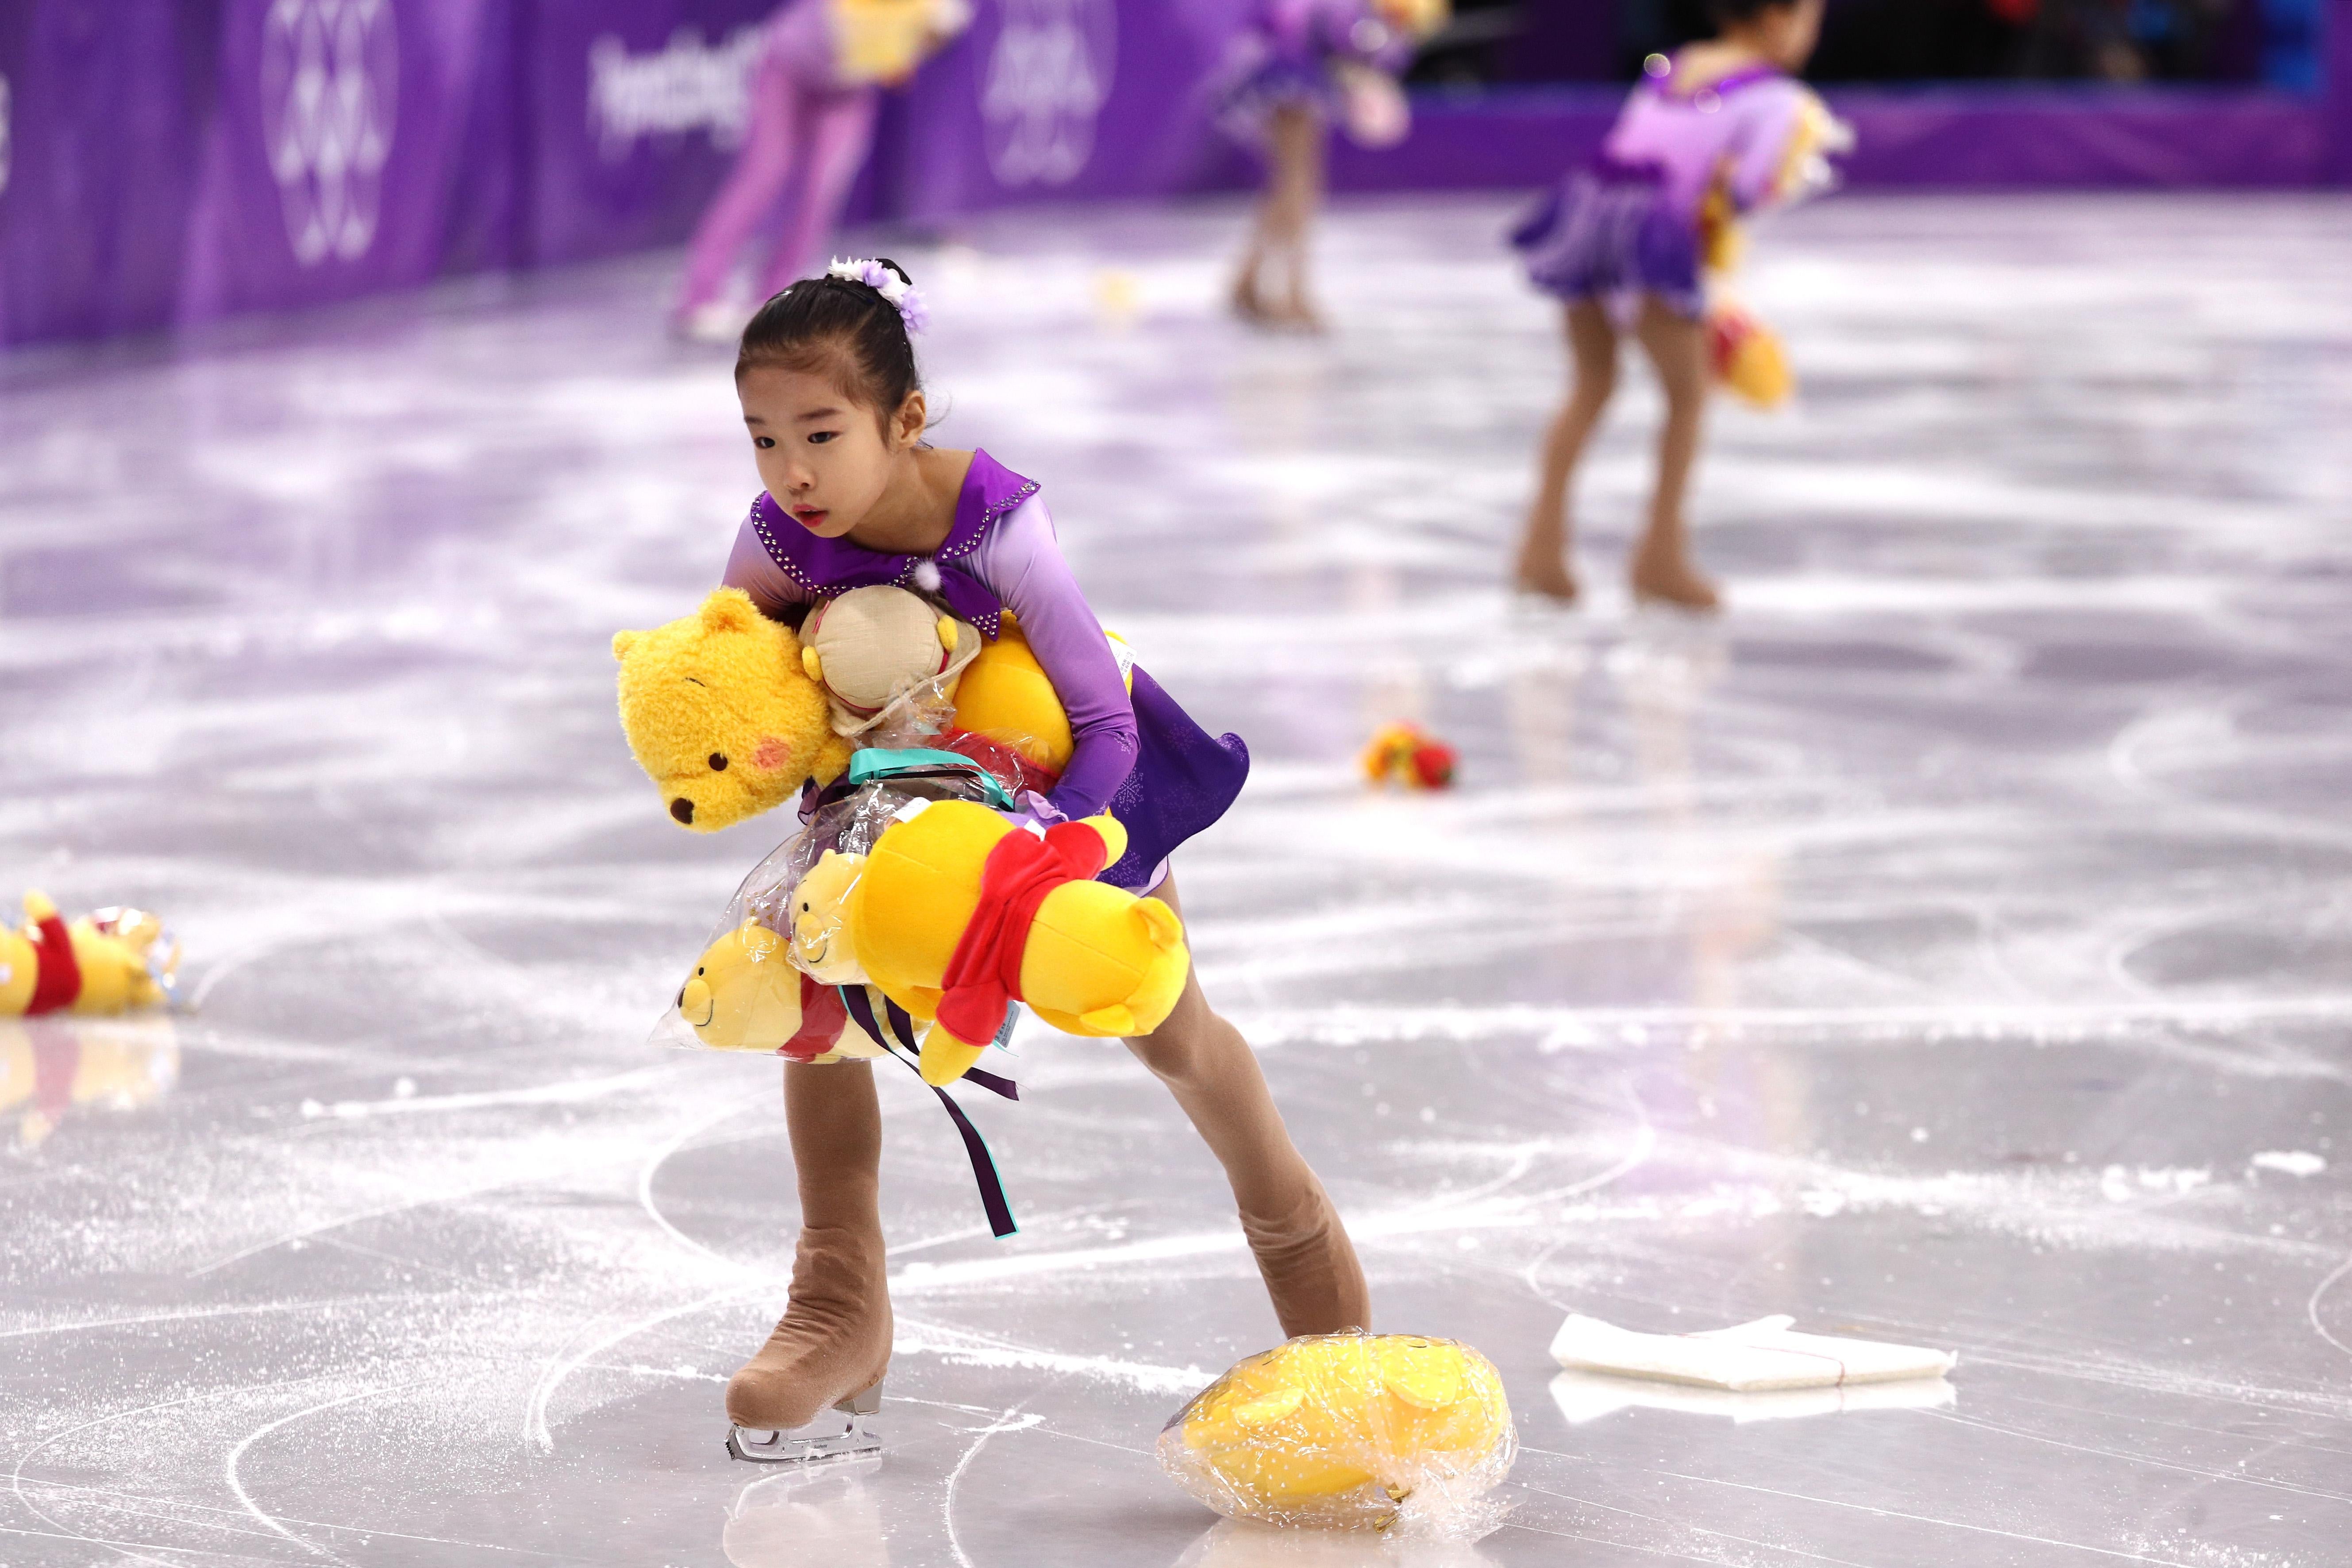 GANGNEUNG, SOUTH KOREA - FEBRUARY 16:  Skaters pick up gifts thrown to the ice for Yuzuru Hanyu of Japan during the Men's Single Skating Short Program at Gangneung Ice Arena on February 16, 2018 in Gangneung, South Korea.  (Photo by Maddie Meyer/Getty Images)